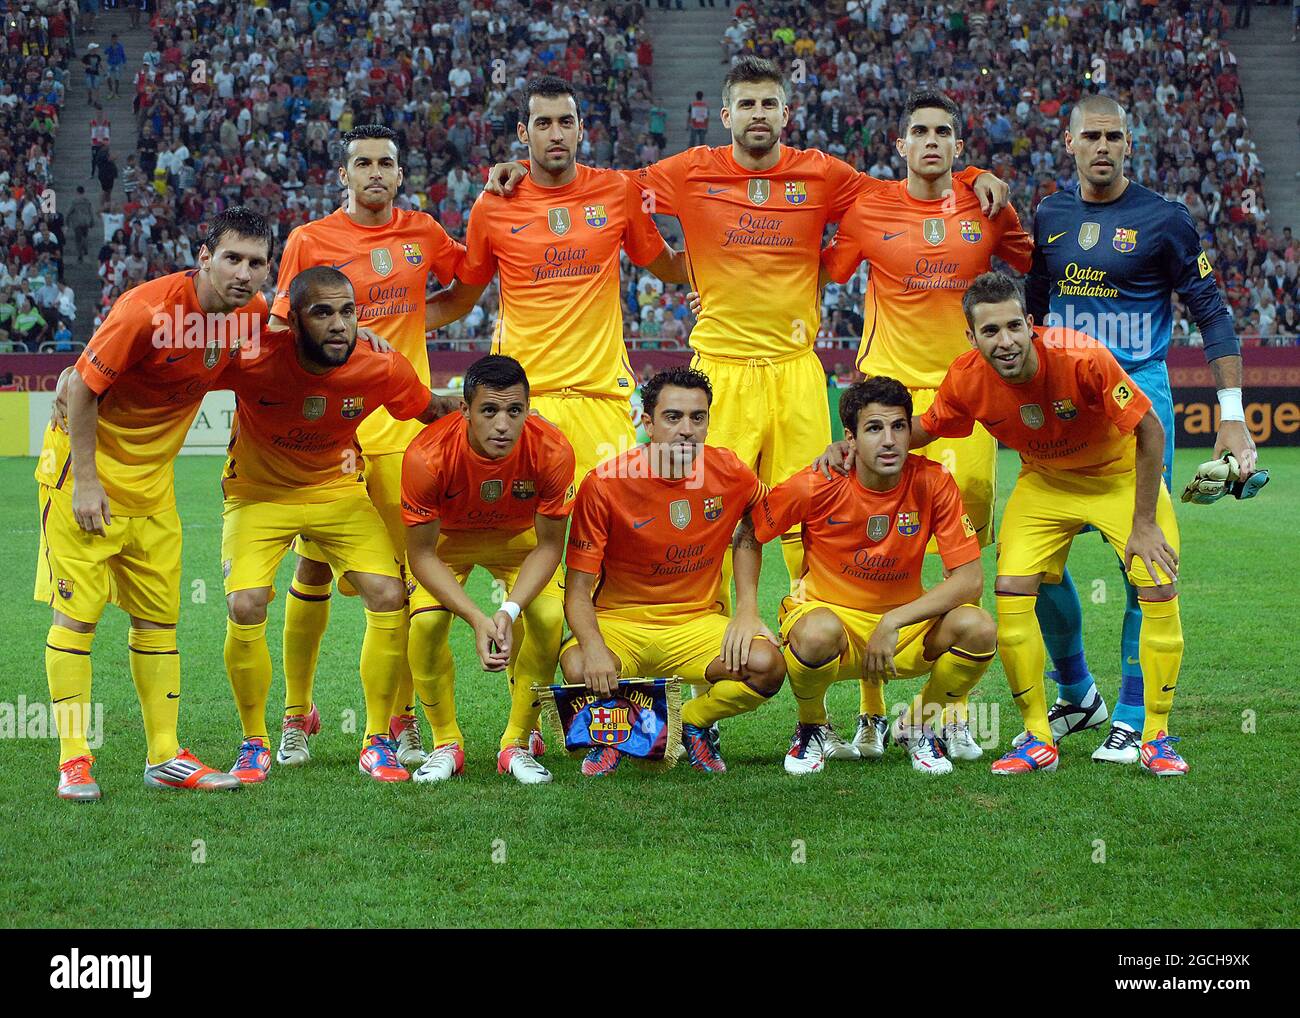 BUCHAREST, ROMANIA - AUGUST 11, 2012: Barcelona line-up poses prior to the pre-season friendly game between Dinamo Bucuresti and FC Barcelona at National Arena. Stock Photo